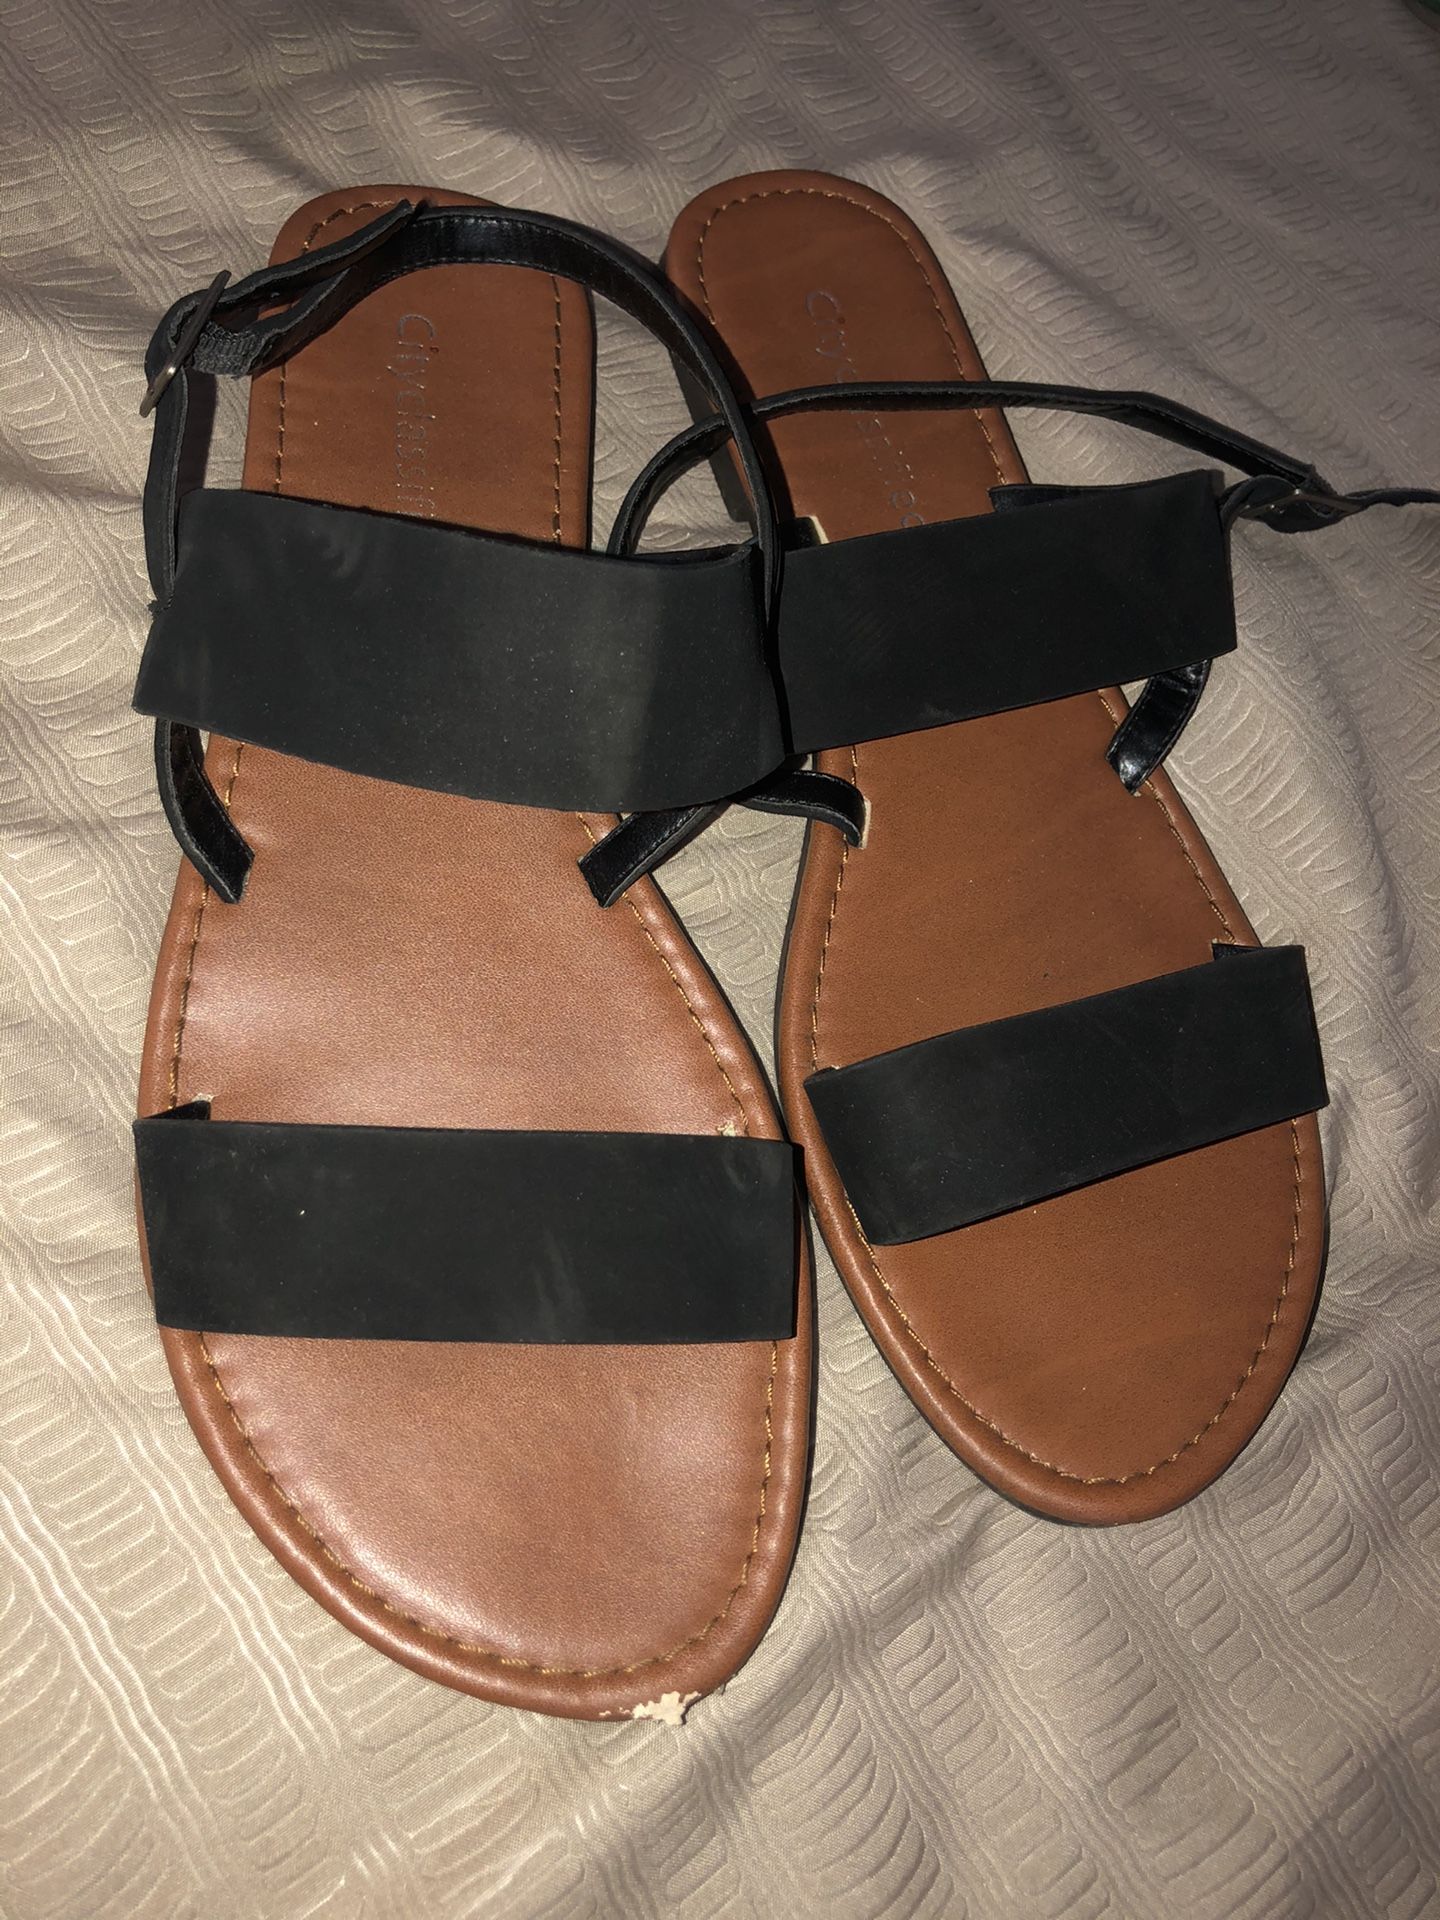 Free Sandals size 9